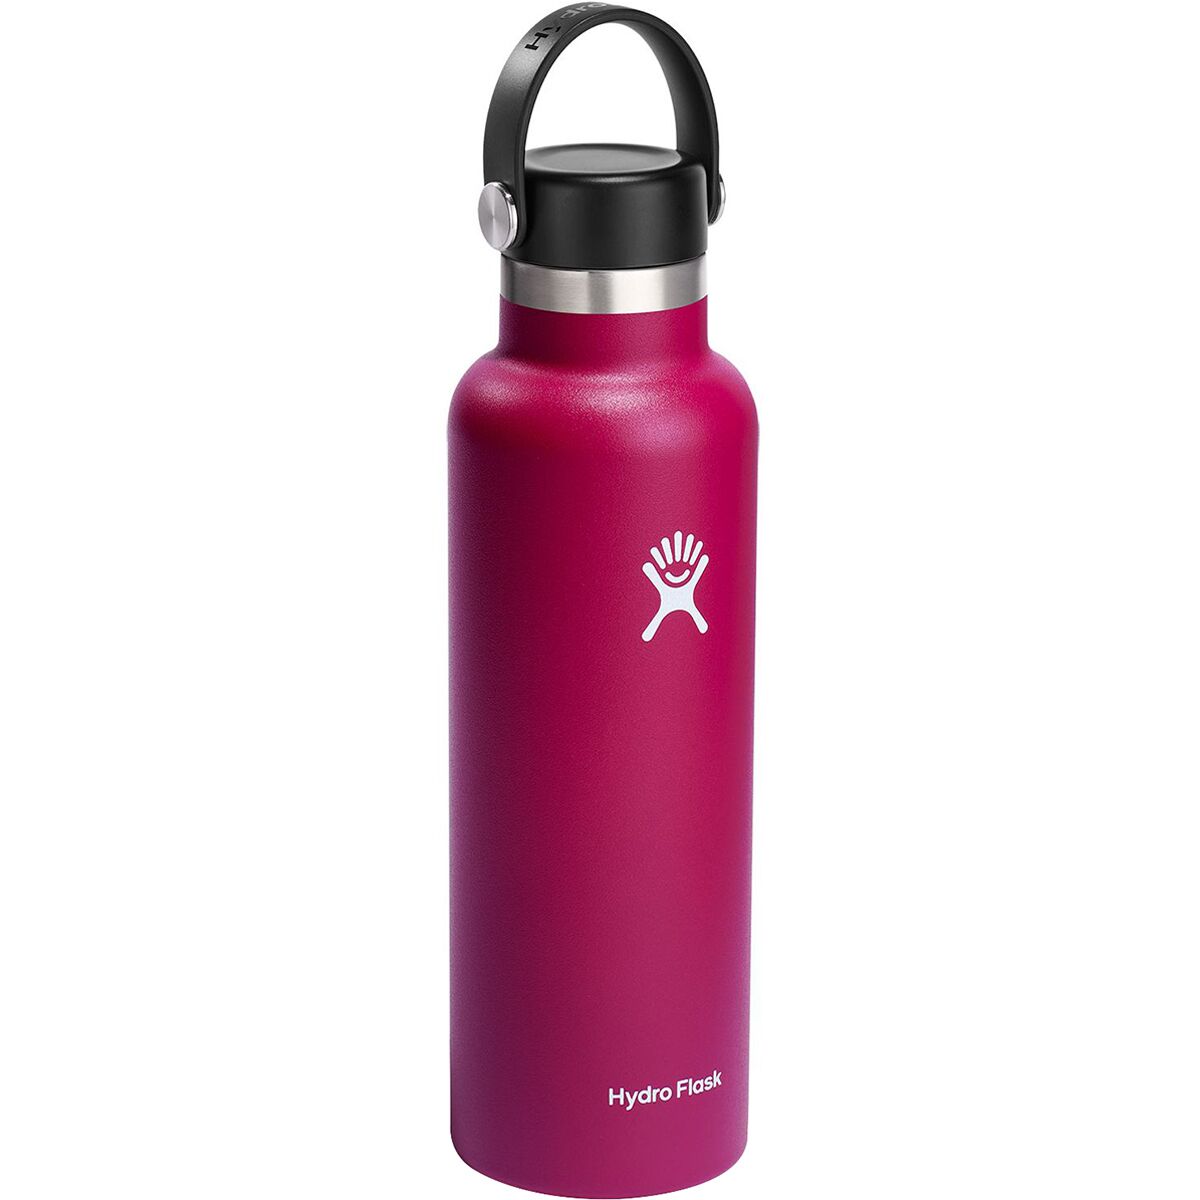 Hydro Flask 21oz Standard Mouth With Flex Cap - Pants Store